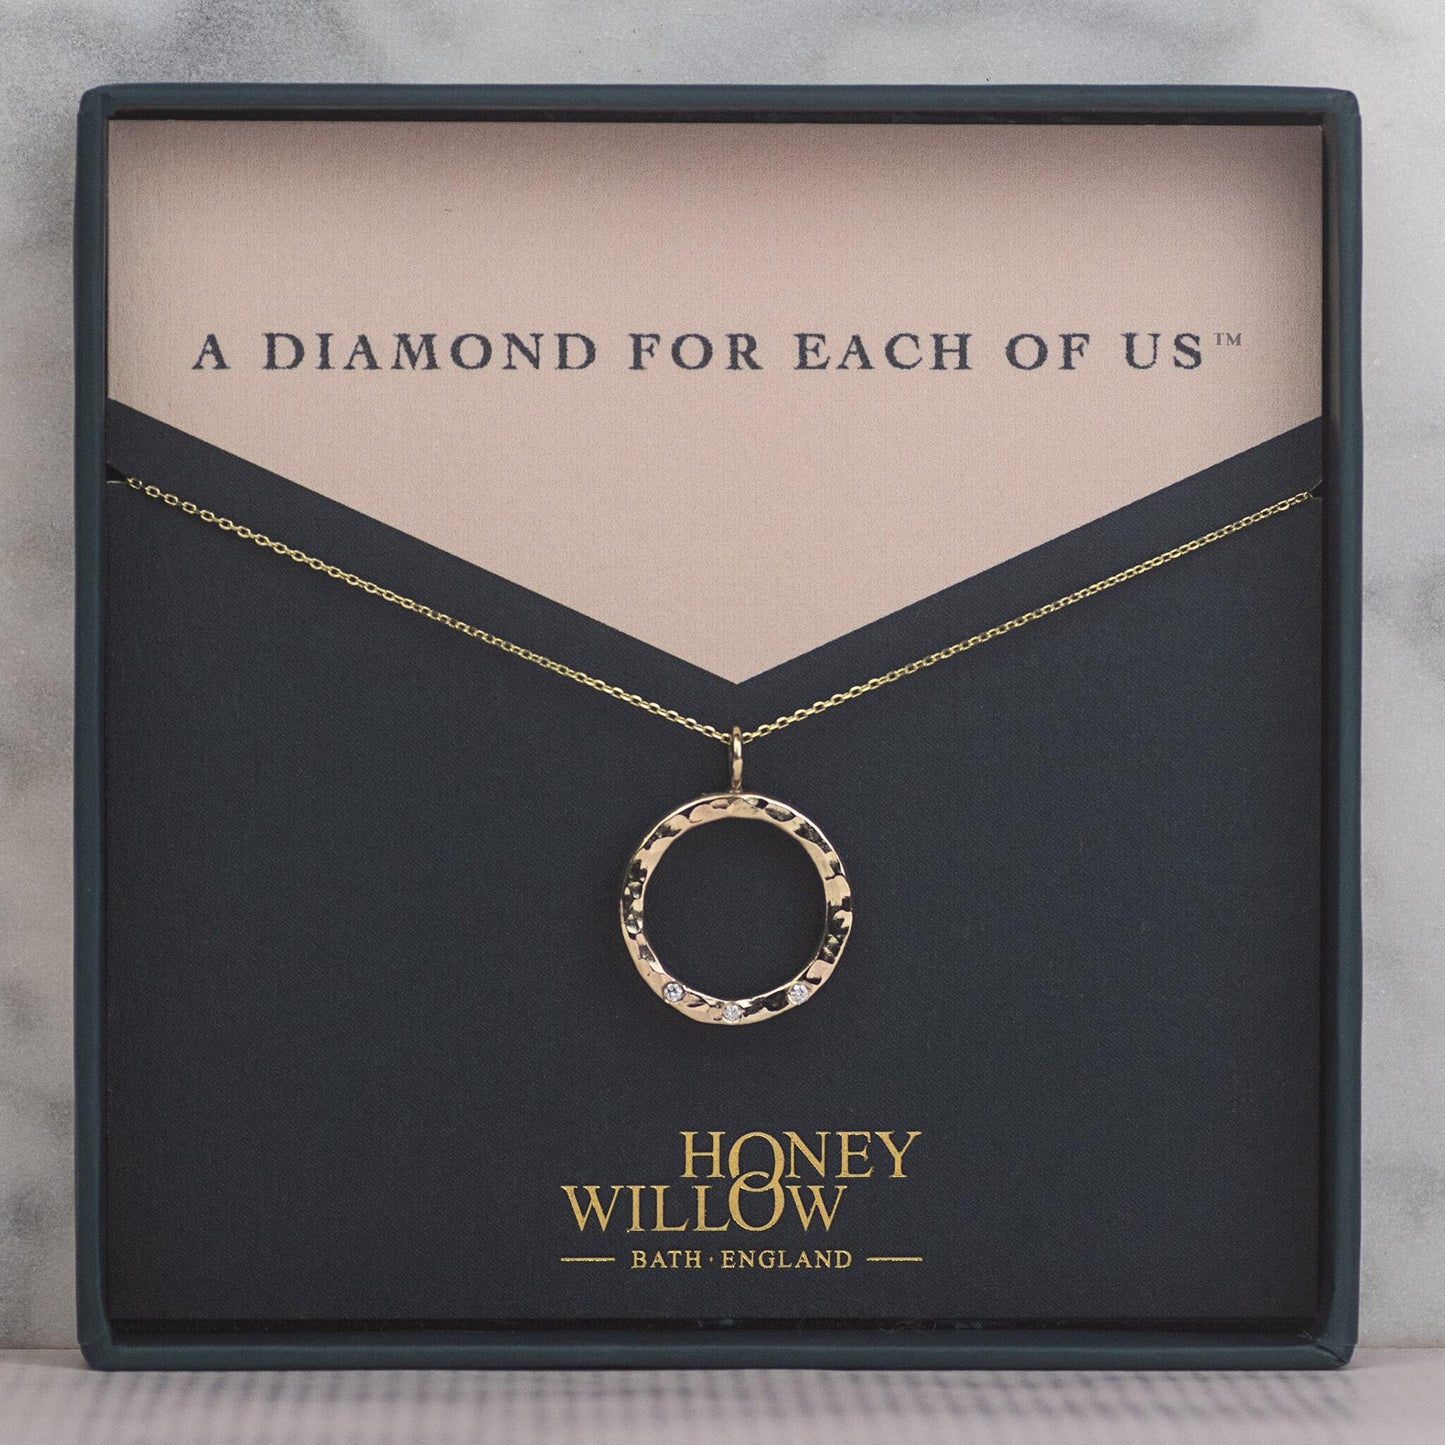 Recycled 9kt Gold 3 Diamond Halo Necklace - A Diamond for Each of Us™